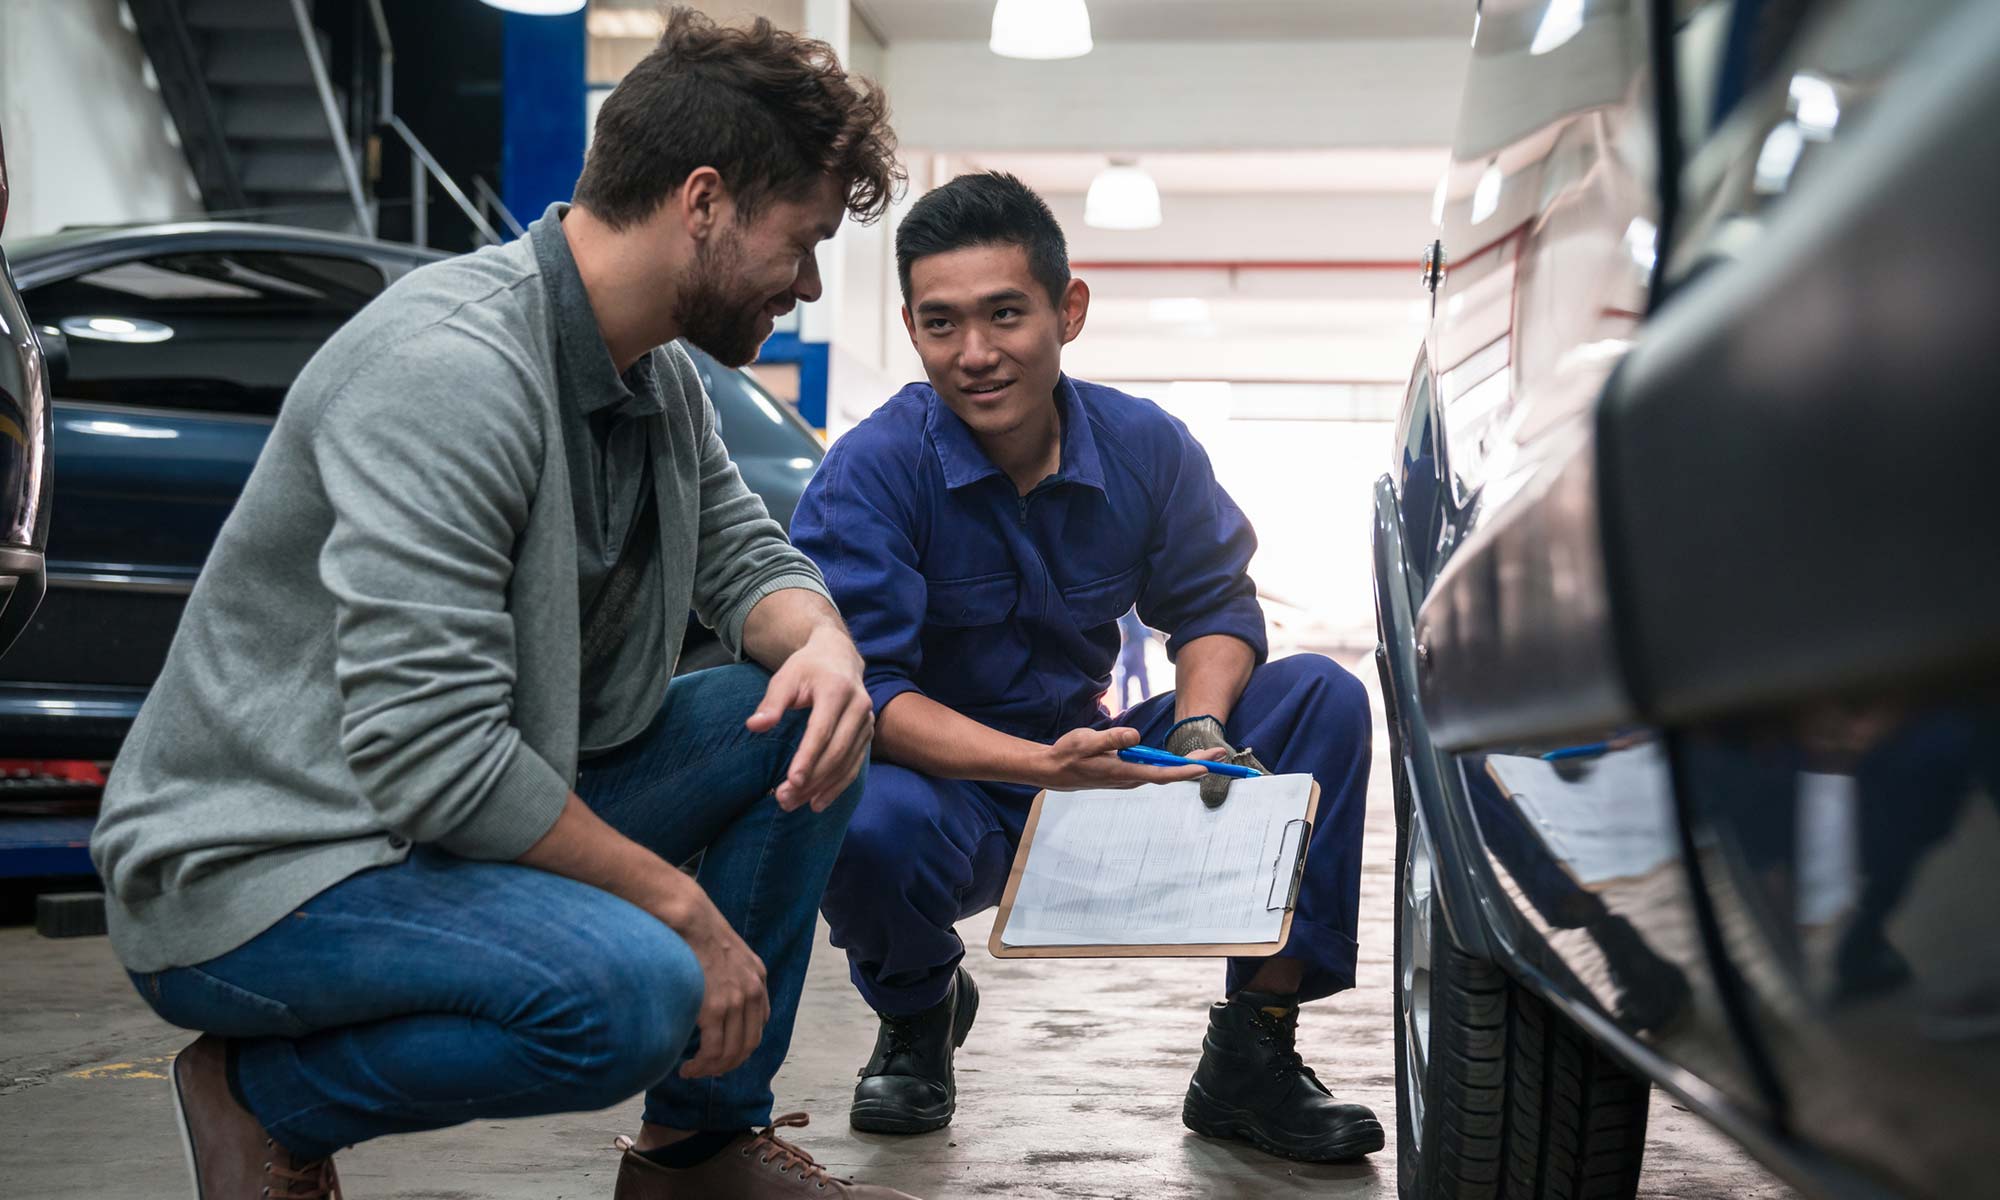 A car mechanic speaks with a customer about their car's brakes, which are covered under the customer's Endurance auto protection plan.